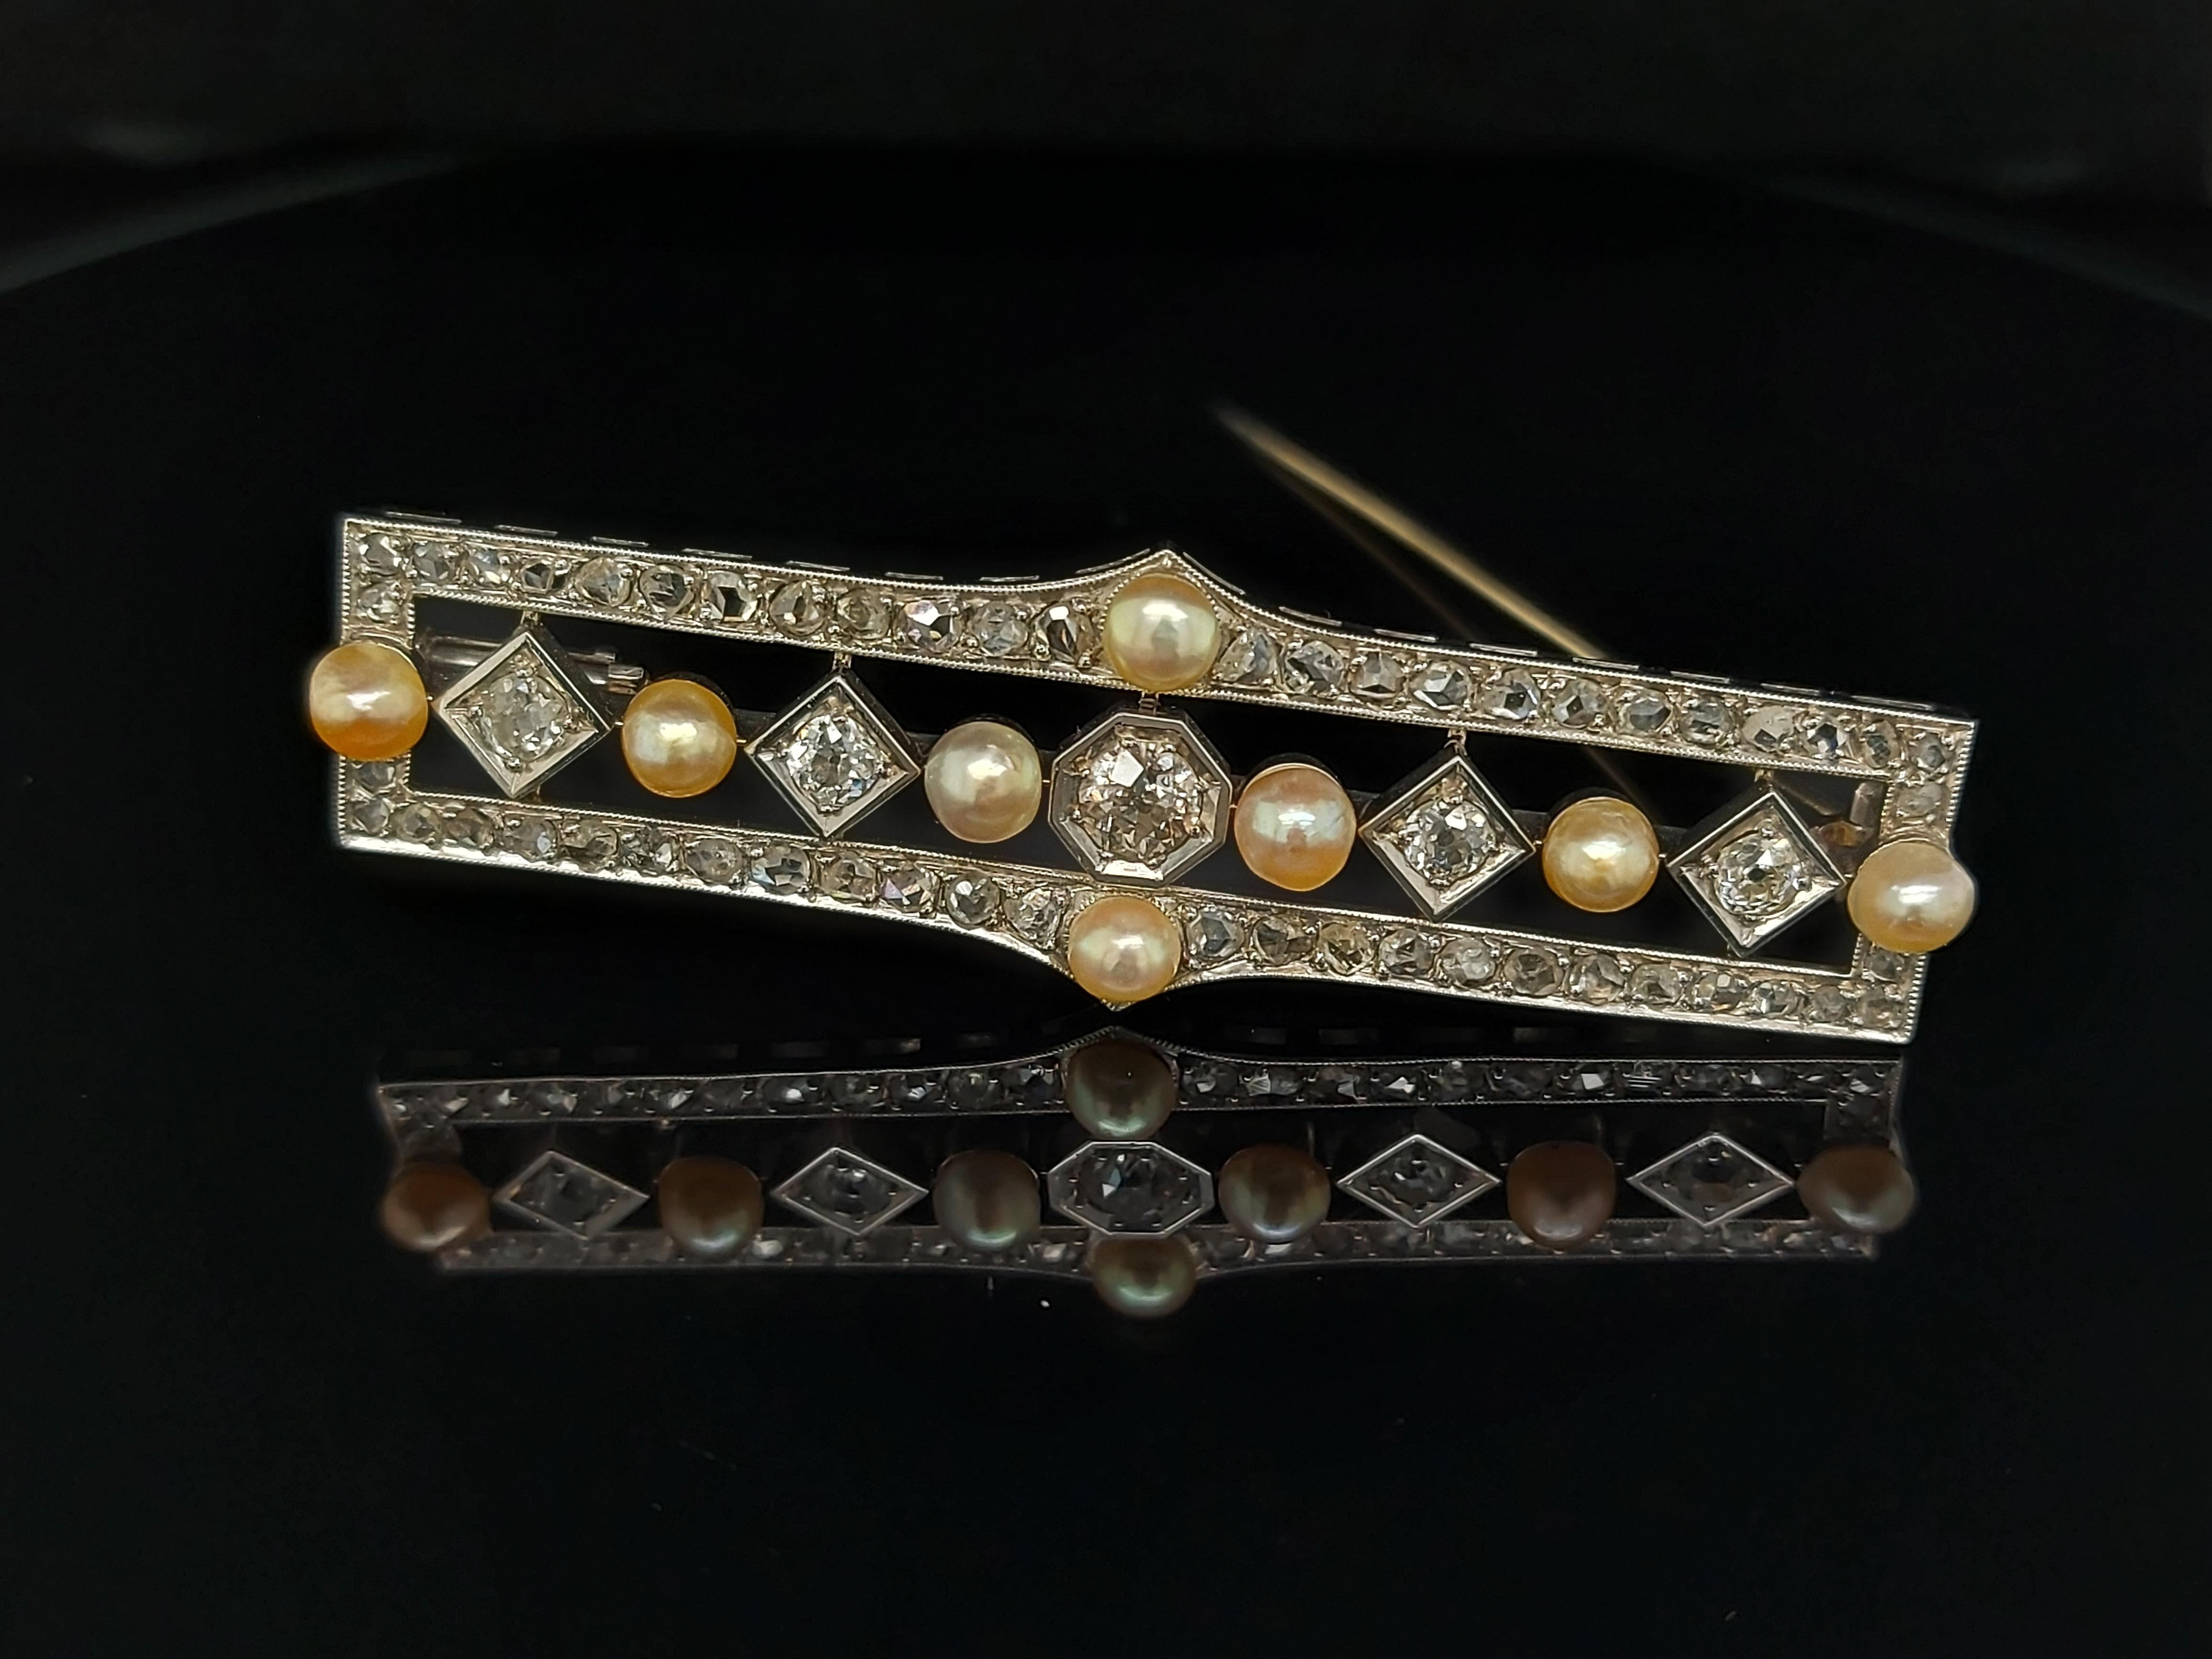 Platinum Hand Made Bar Brooch with Diamond and Pearls 

Pearls: 8 beautiful natural pearls with a diameter of approx. 4 mm.

Diamonds: The largest 5 diamonds are in an Old Mine cut:
1 stone of 0.36 ct
4 stones of 0.12 ct each .Total 0.48 Ct
Another